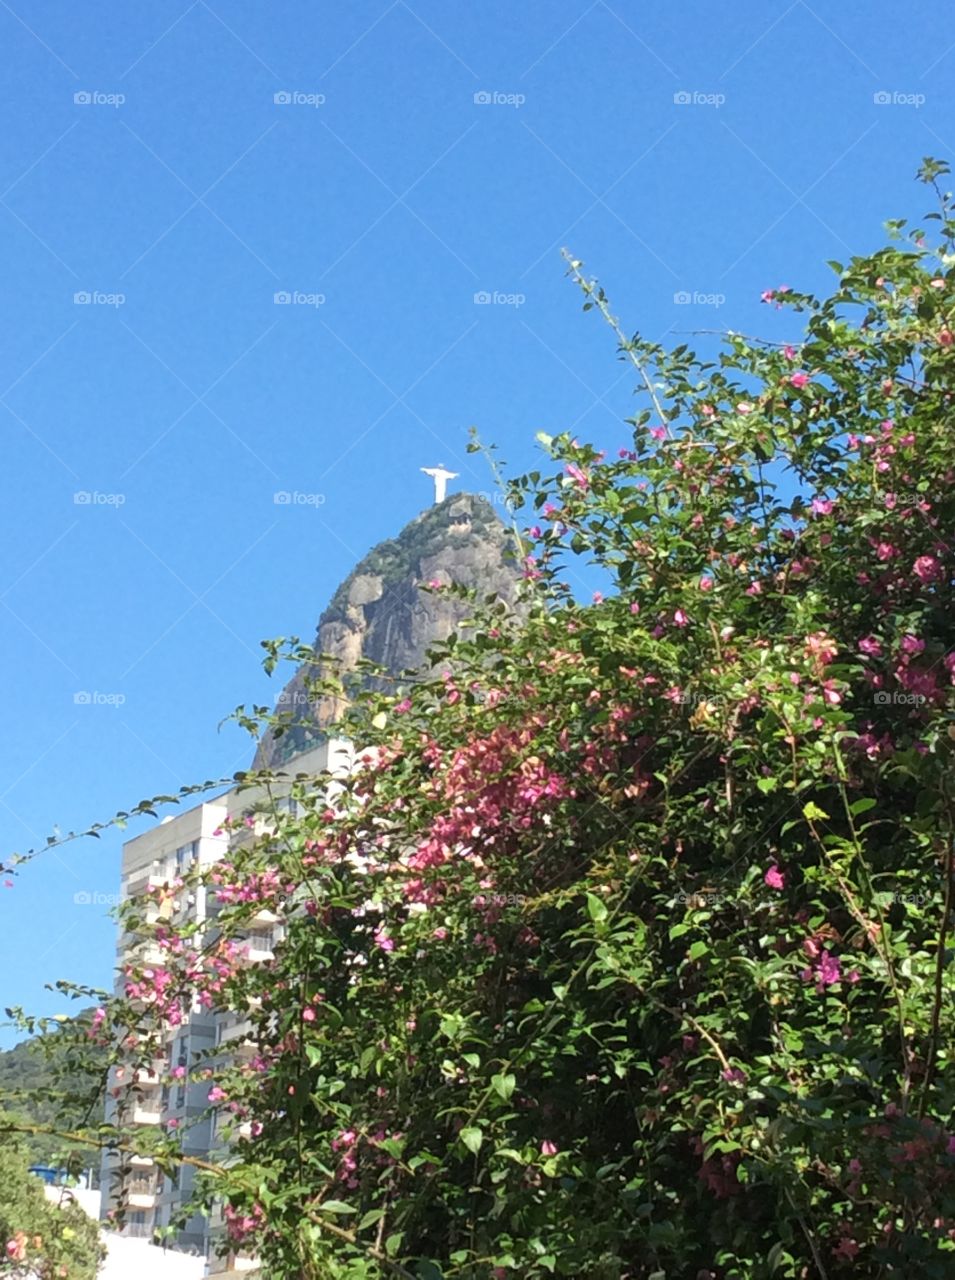 The spring blossoms brightening even more the Statue of Christ the Redeemer in the Stone. Tourist Point of Rio de Janeiro